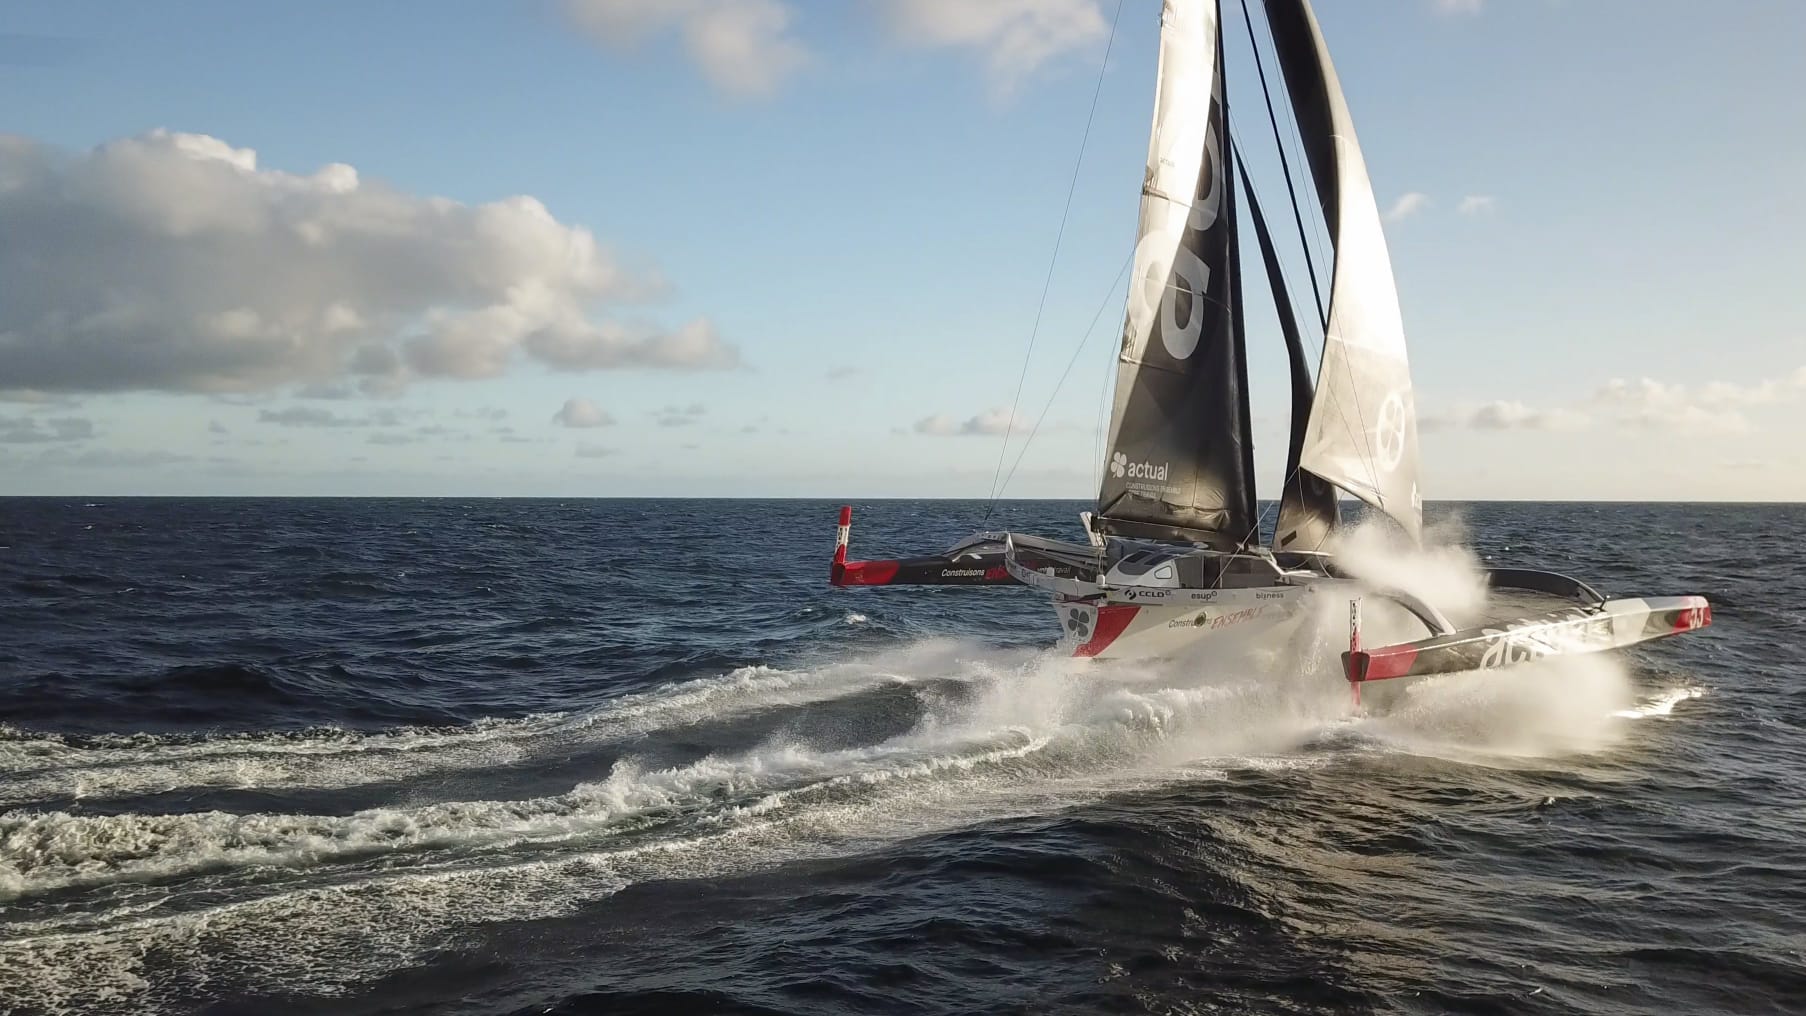 TEAM ACTUAL AIM FOR VICTORY AT THE ROLEX FASTNET RACE